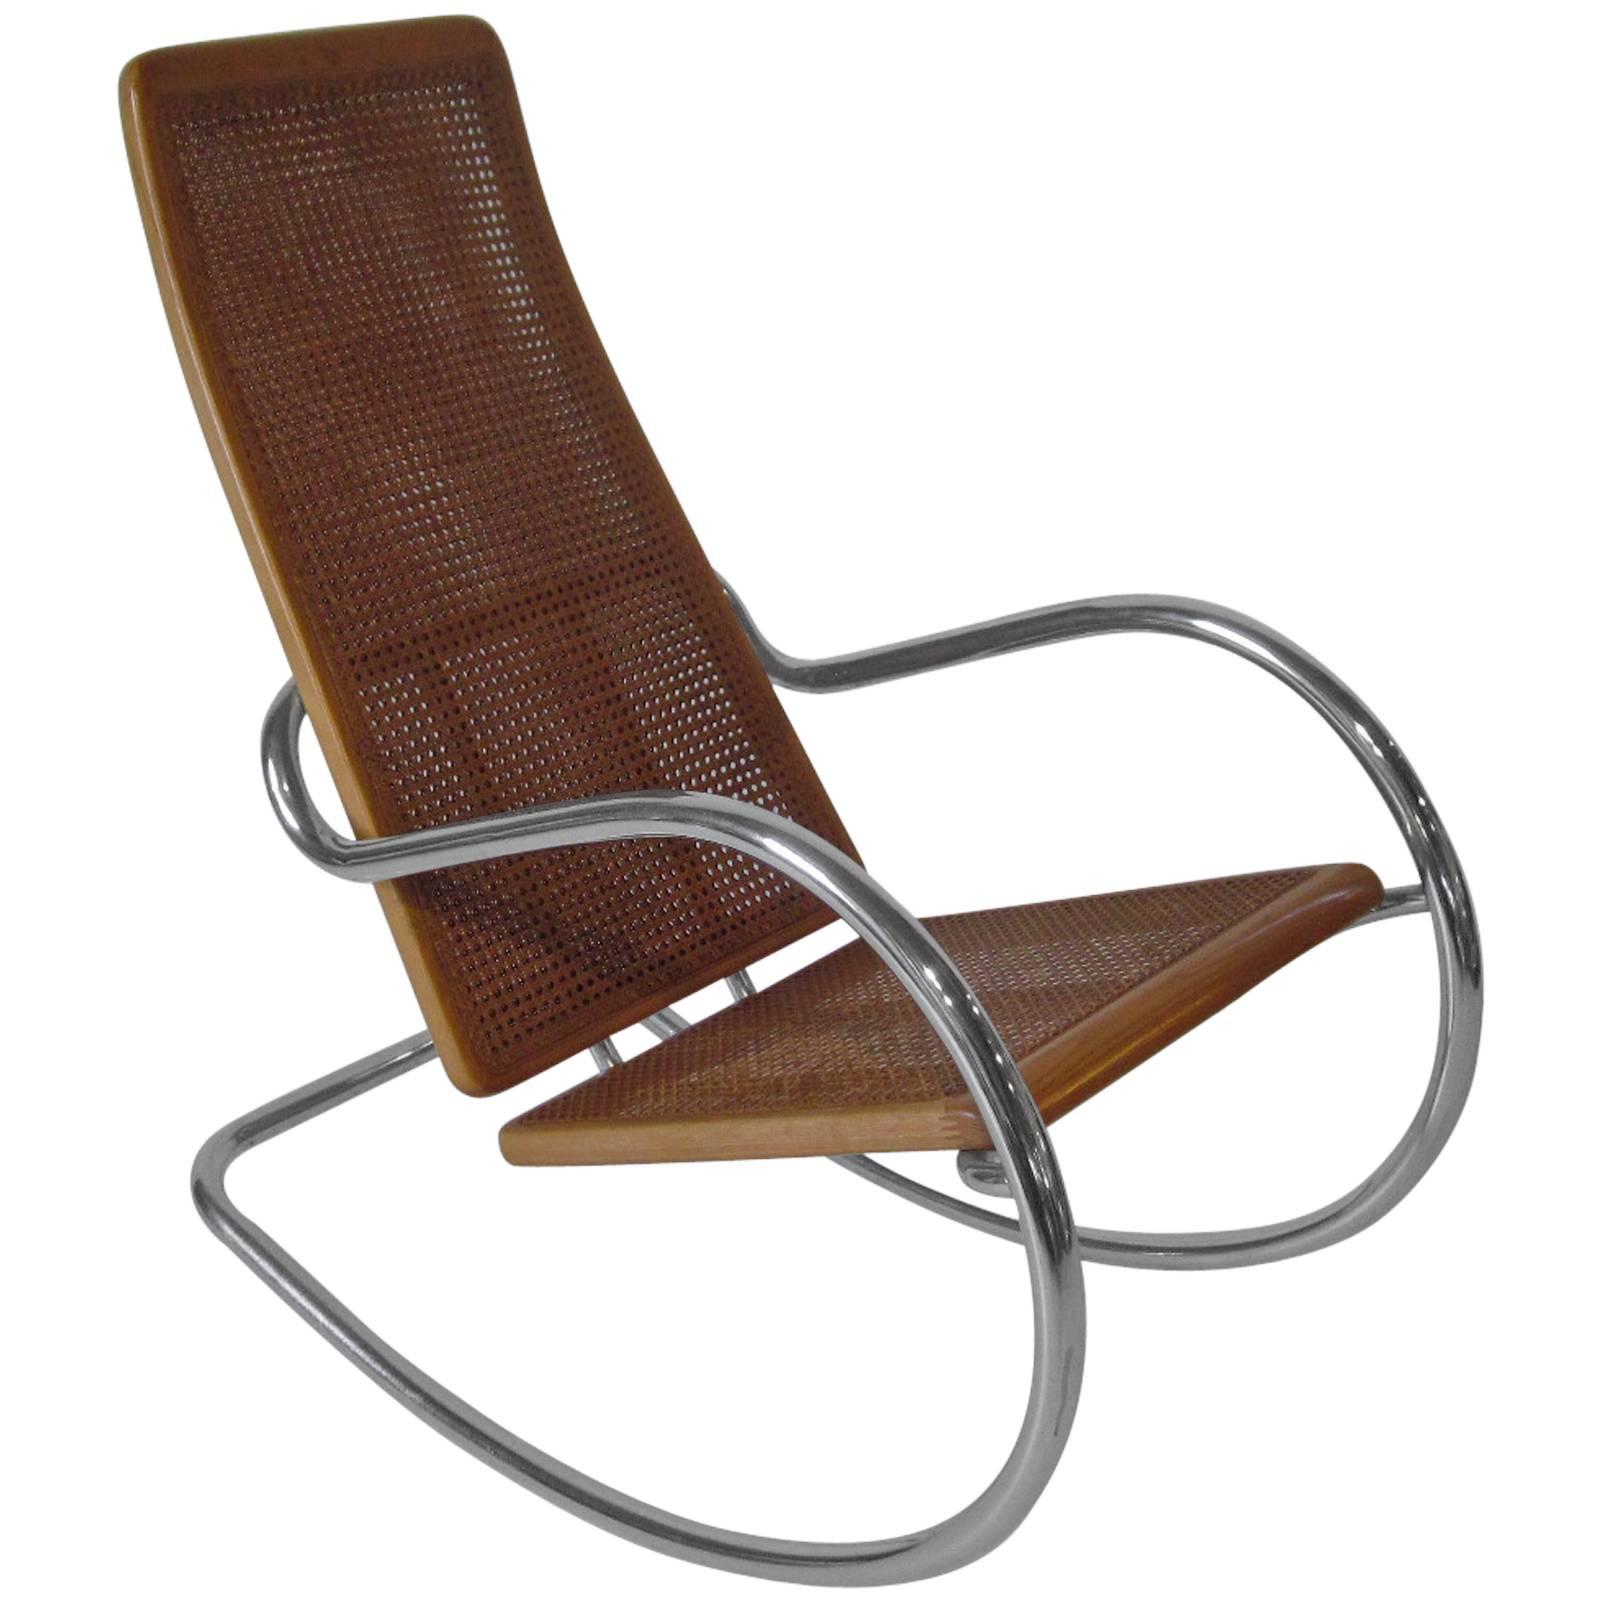 Italian Chrome and Wood Caned Rocking Chair